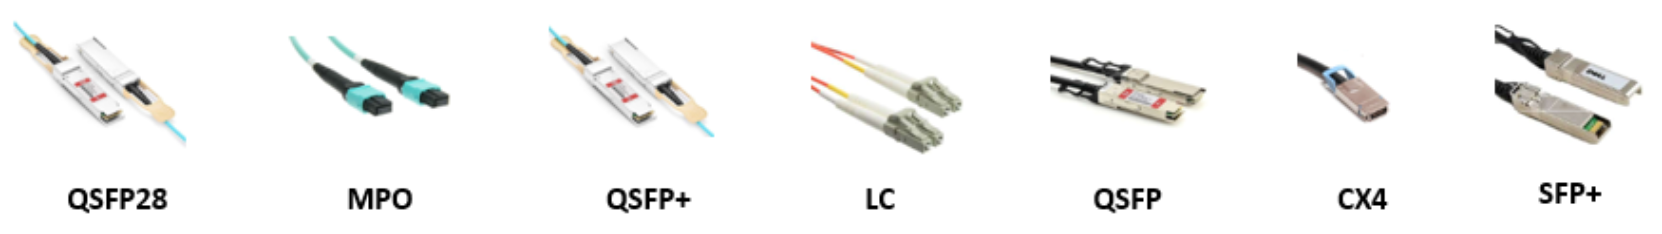 Graphic showing a variety of Ethernet and Infiniband network cable connector types.